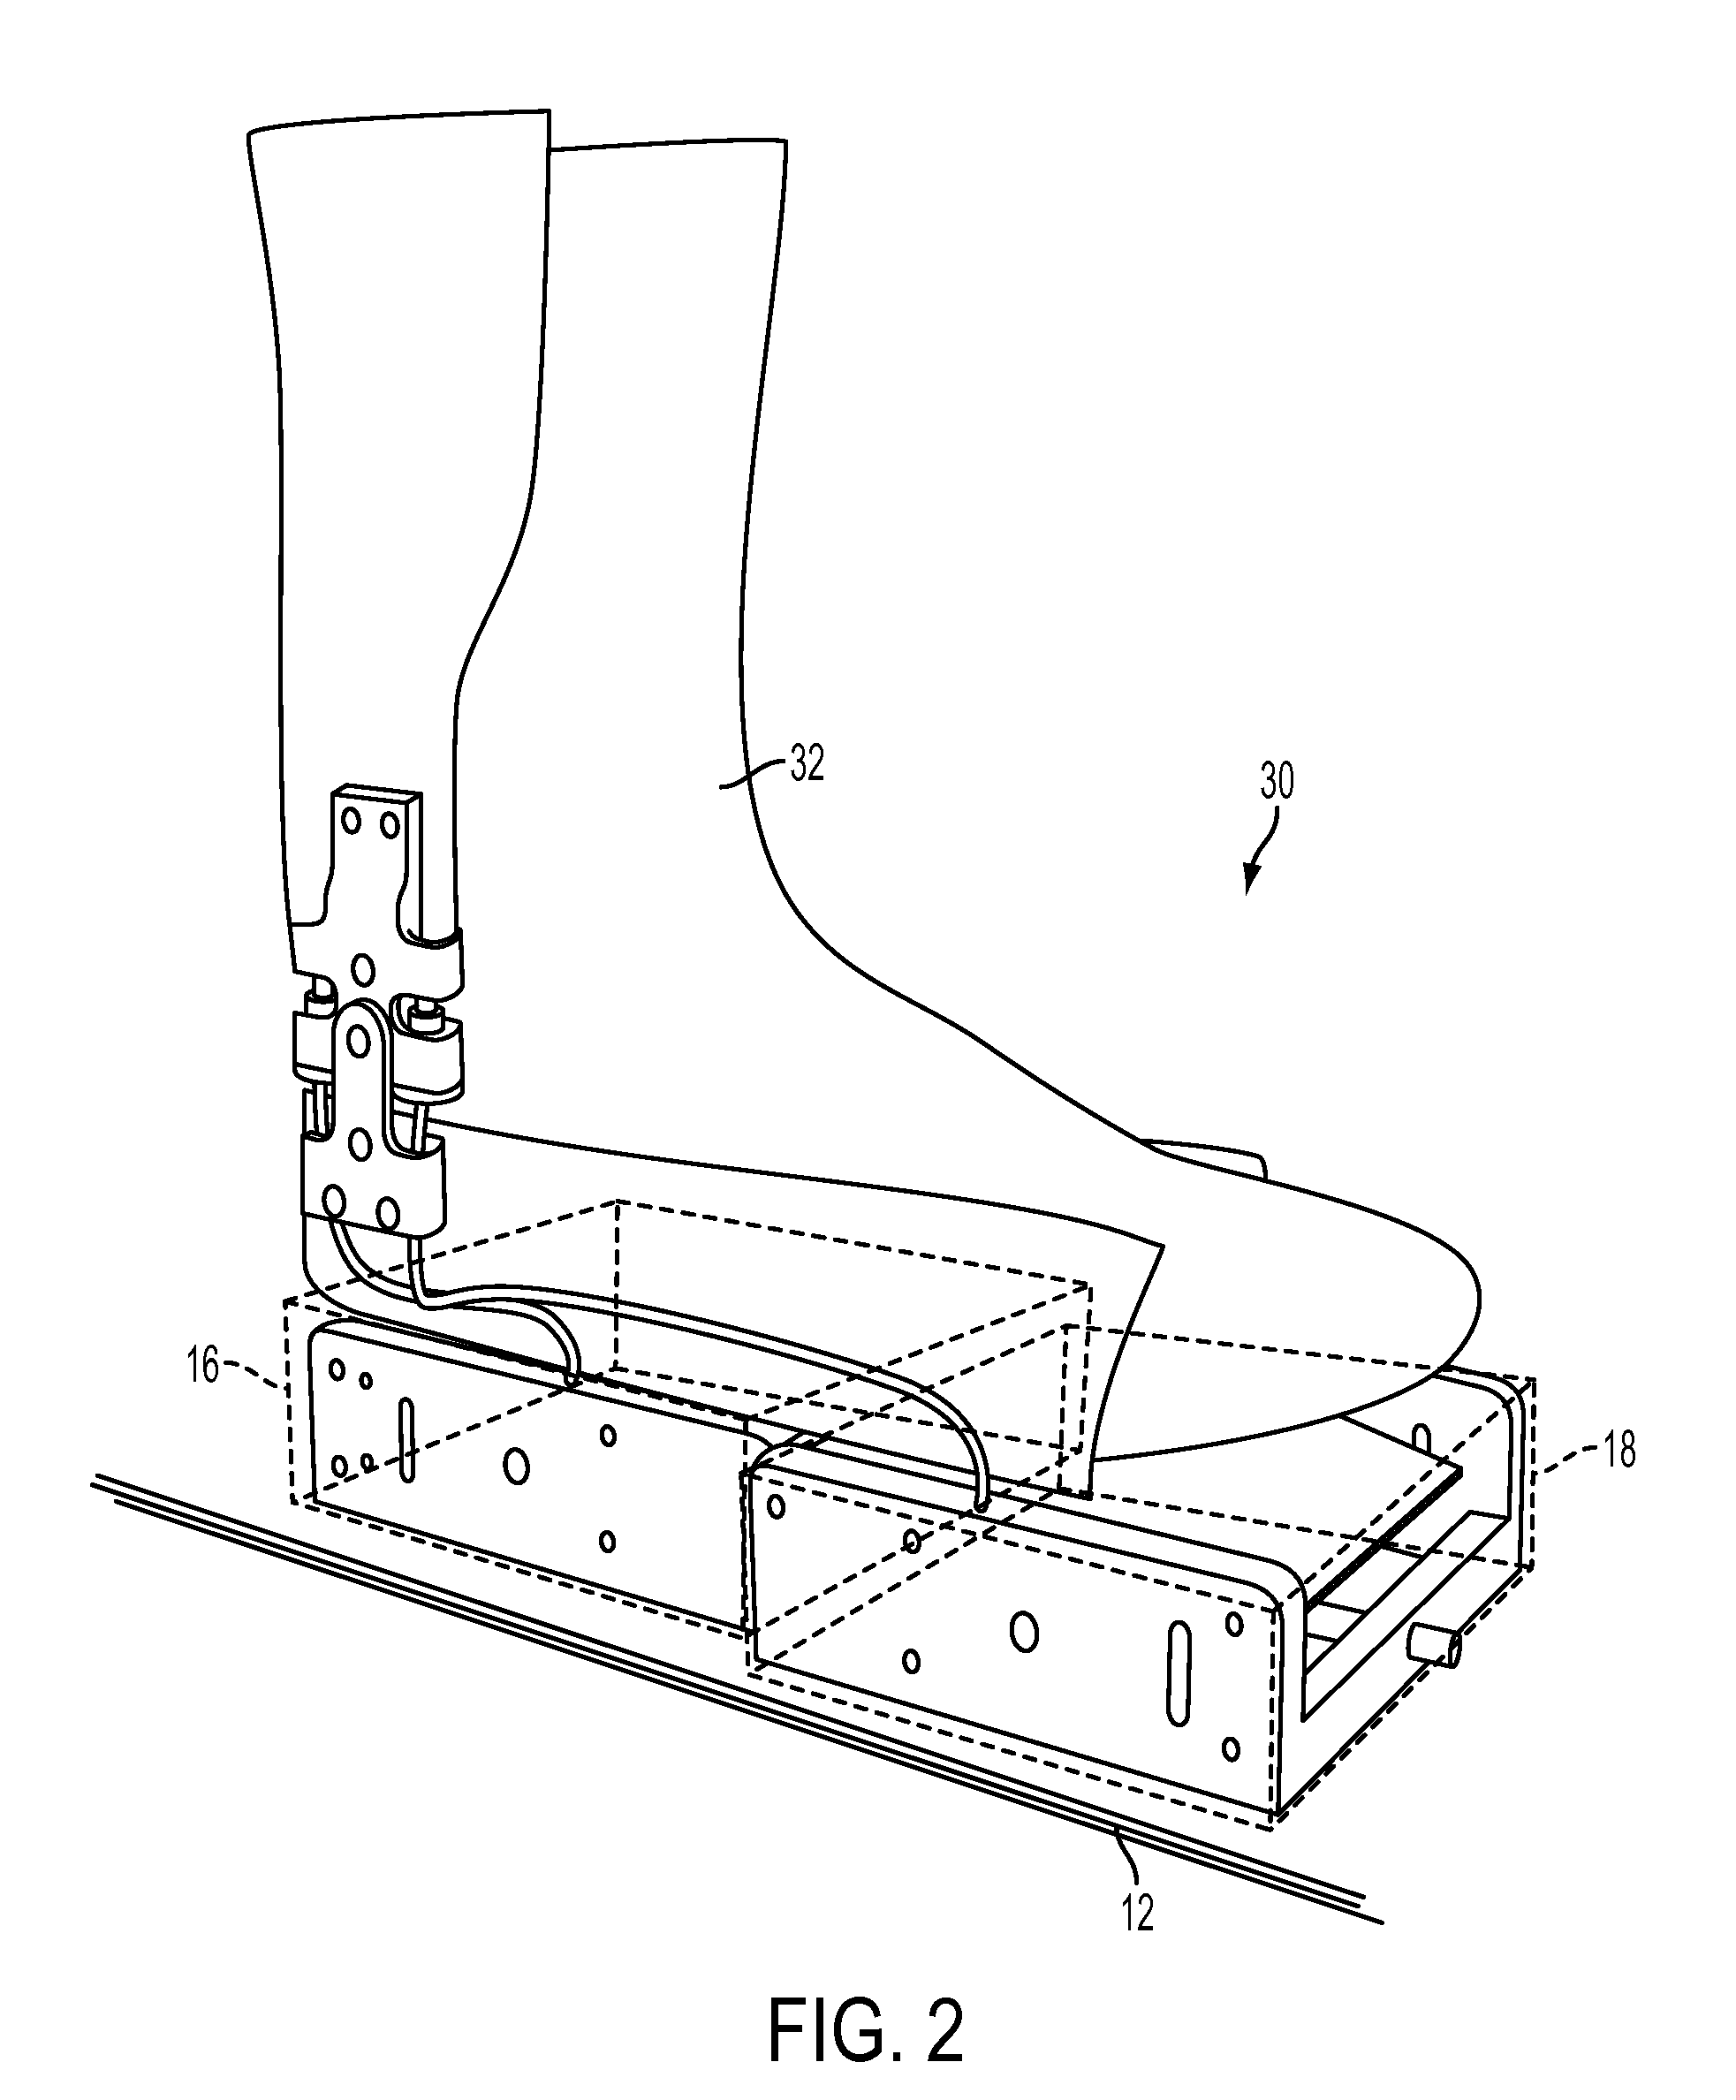 Method and System for Energy Returning Ankle Foot Orthosis (ERAFO)